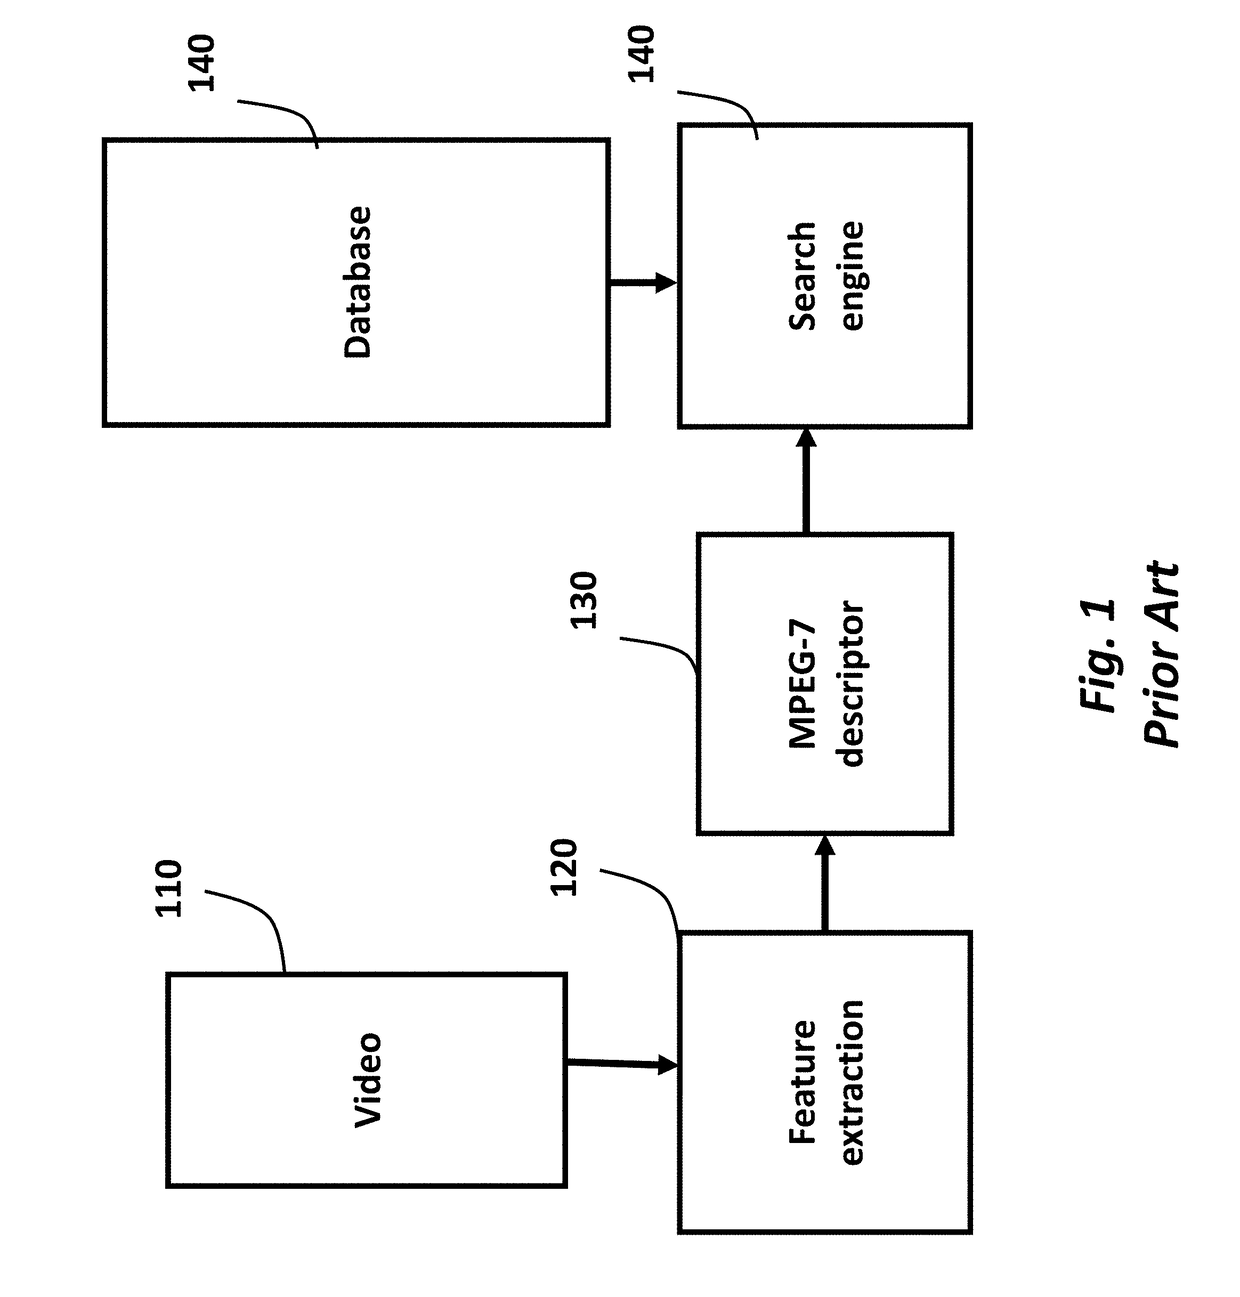 Method and Apparatus for Keypoint Trajectory Coding on Compact Descriptor for Video Analysis